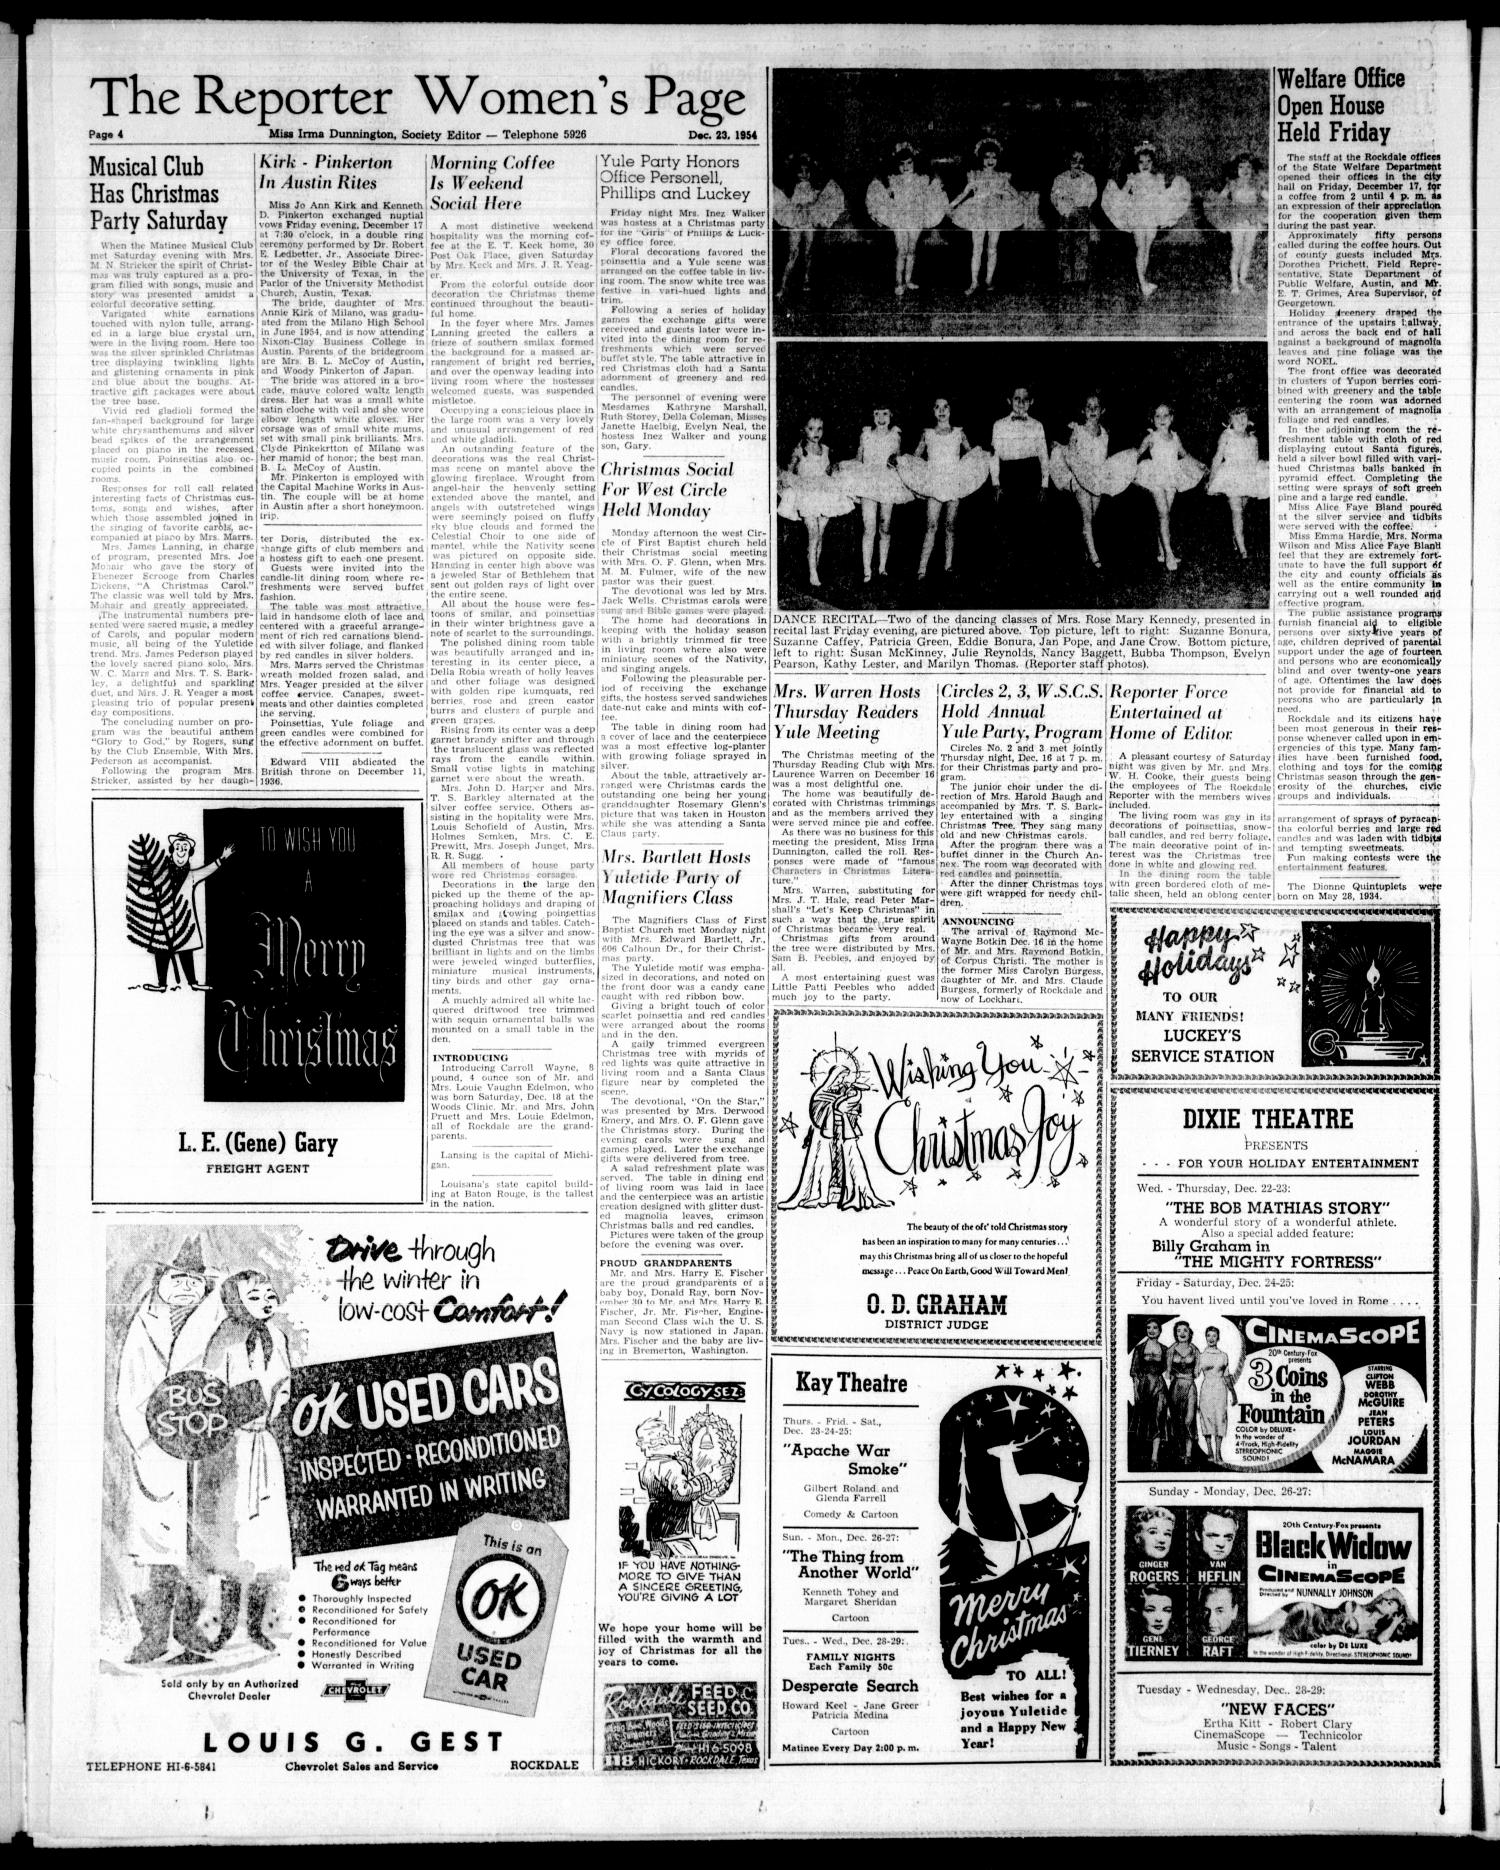 The Rockdale Reporter And Messenger Rockdale Tex Vol No 49 Ed 1 Thursday December 23 1954 Page 4 Of 36 The Portal To Texas History